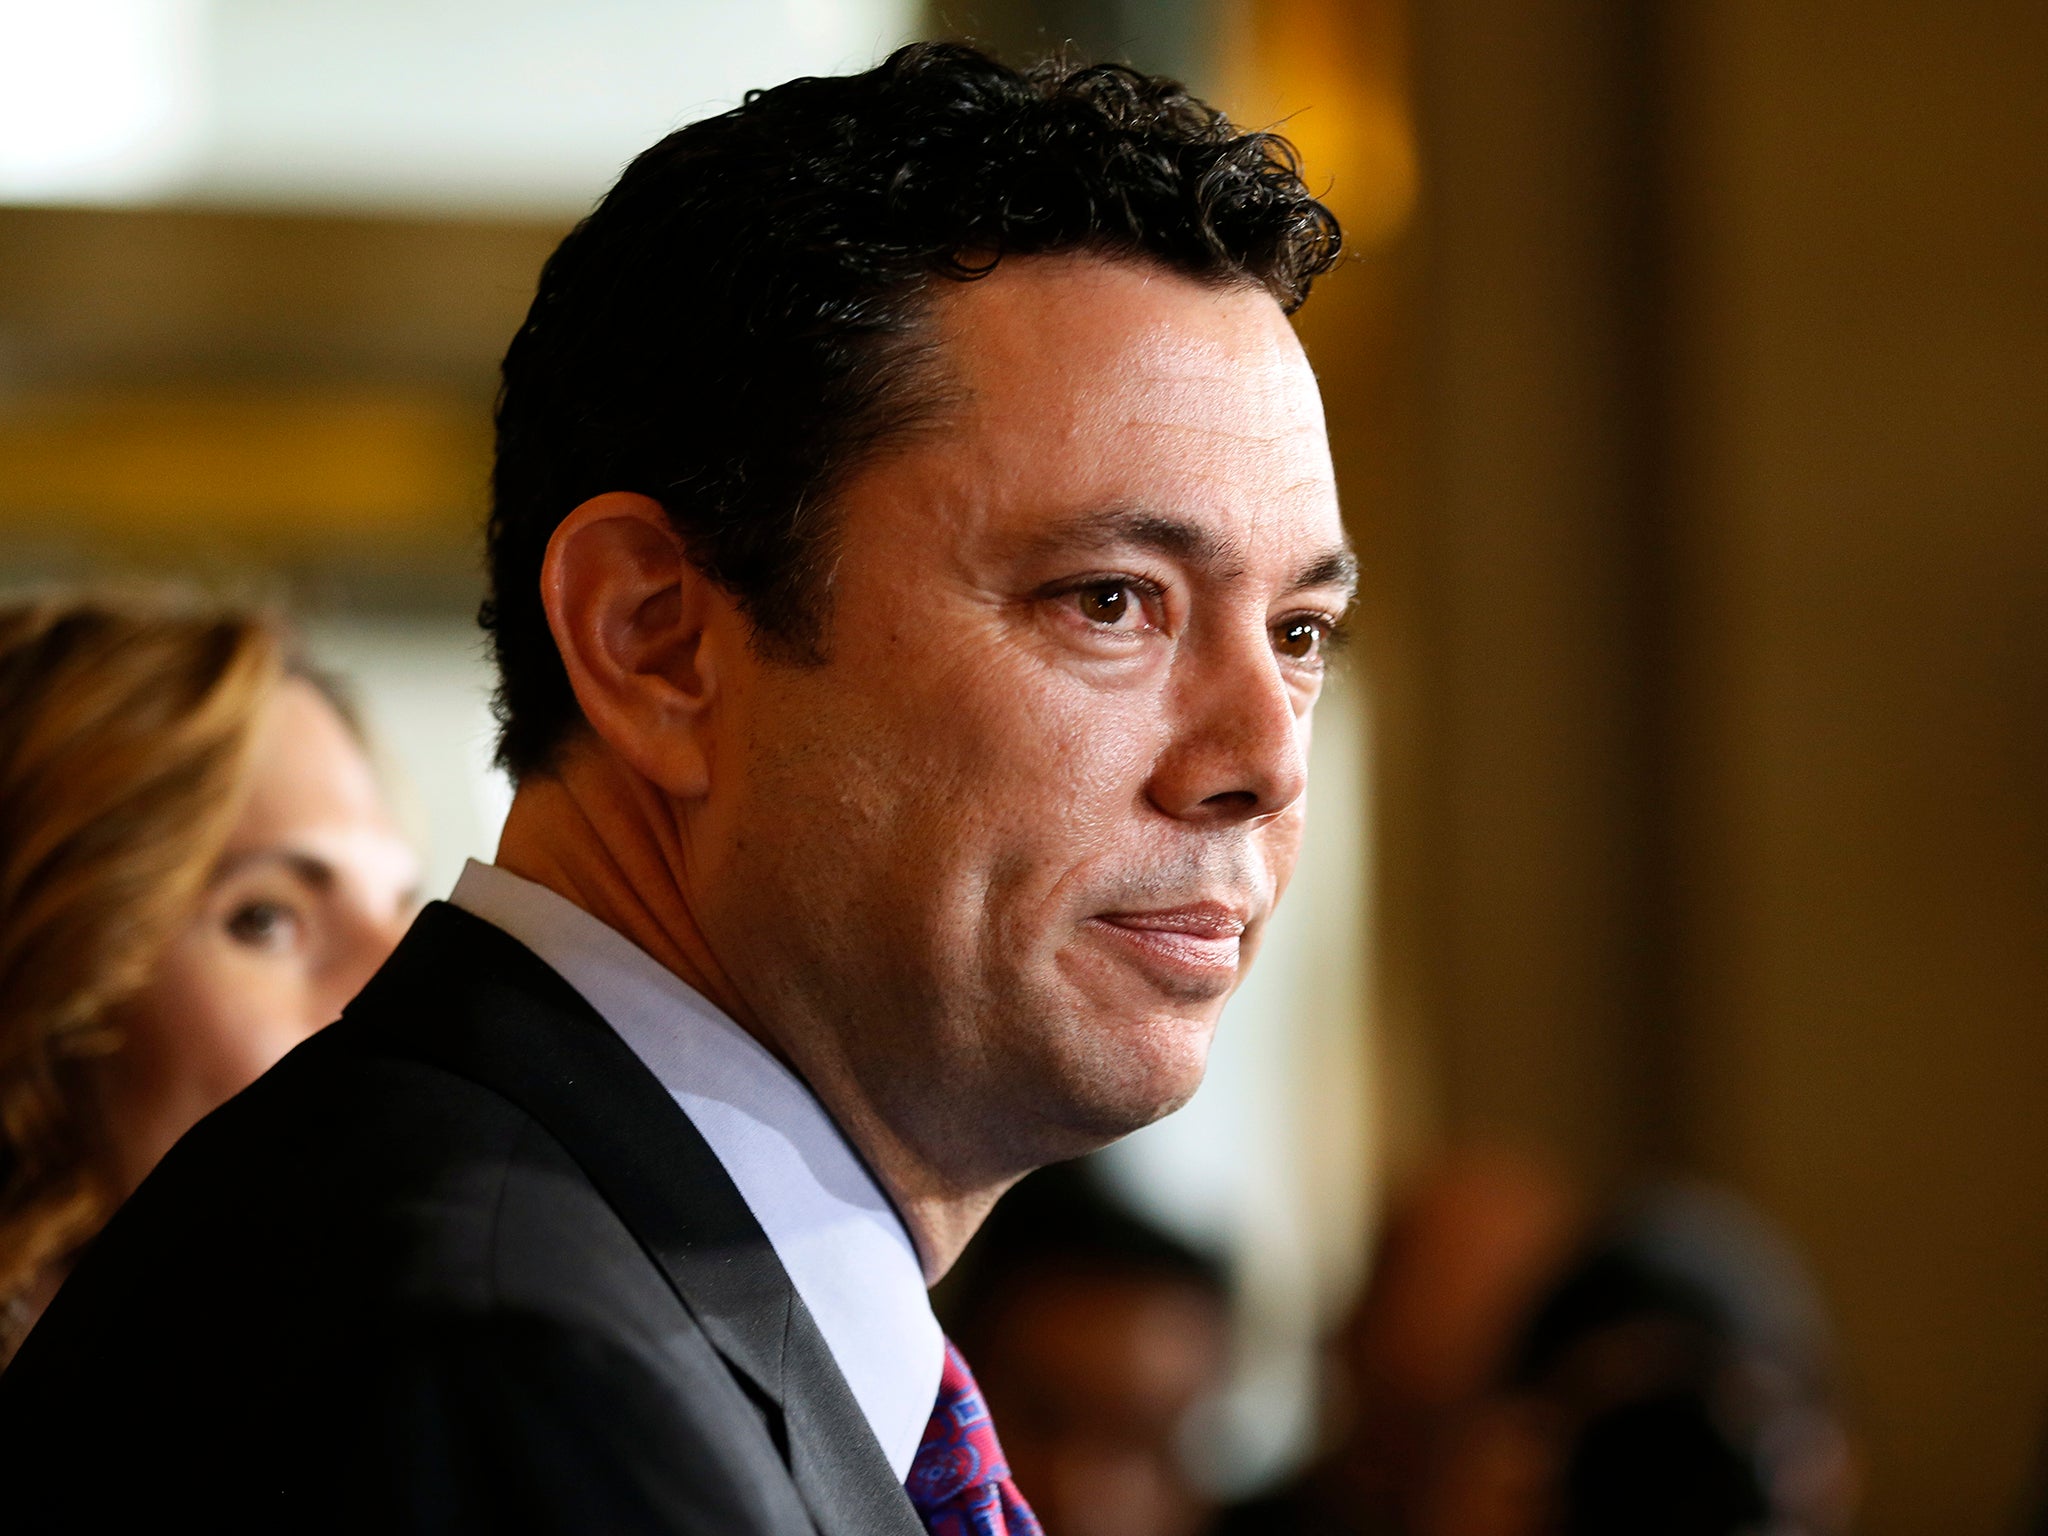 Jason Chaffetz clearly isn't very familiar with poverty